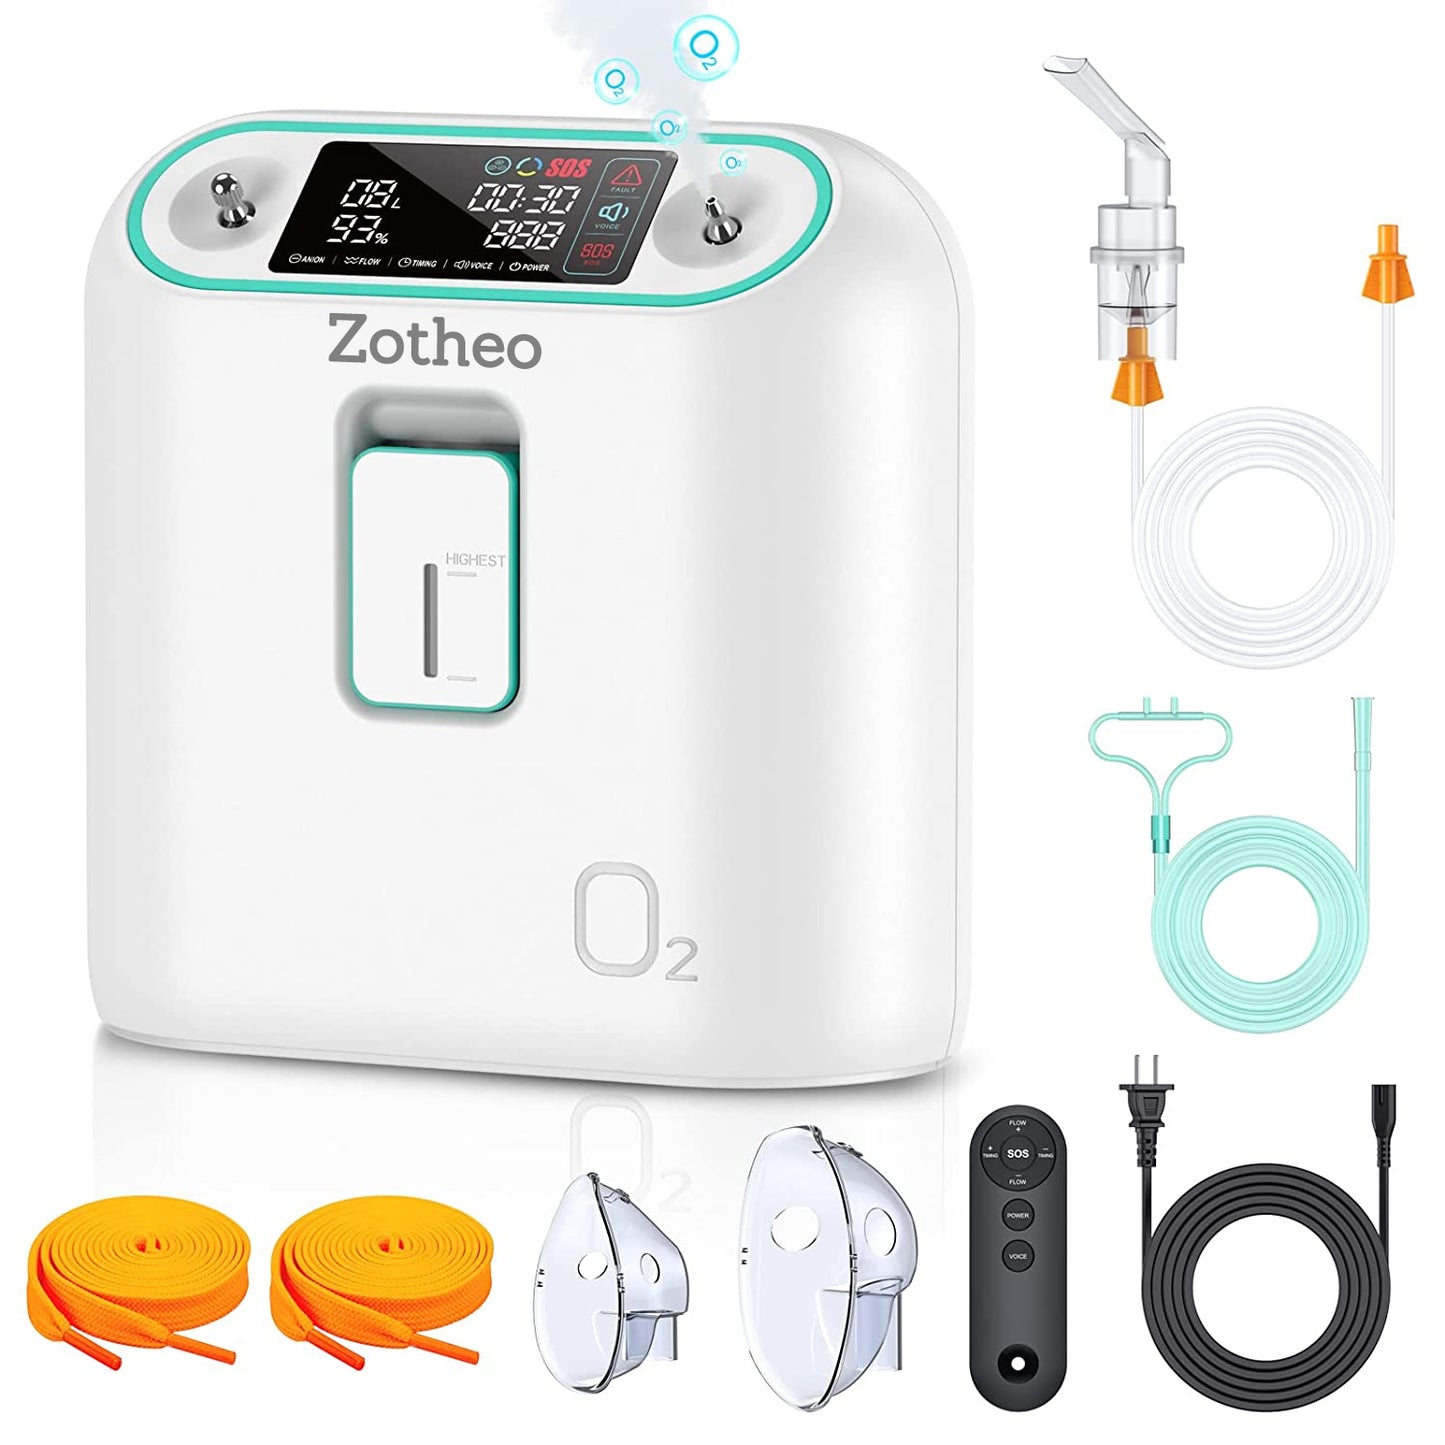 Zotheo oxygen concentrator high quality oxygenerator adjustable flow 1-8L